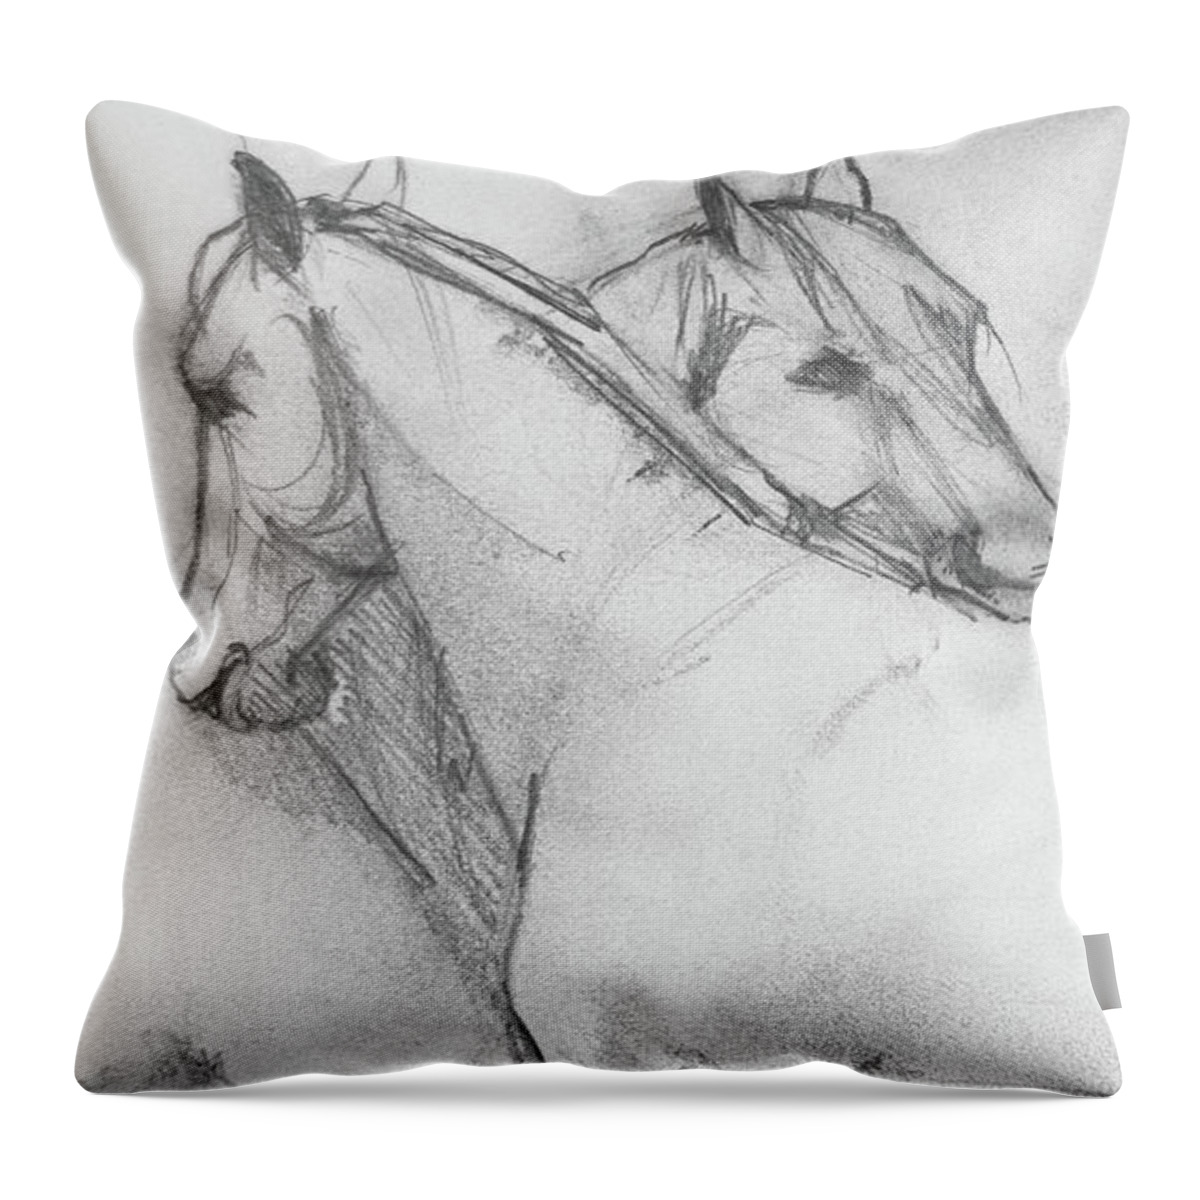 Horse Art Throw Pillow featuring the drawing Reciprocity Sketch by Jani Freimann